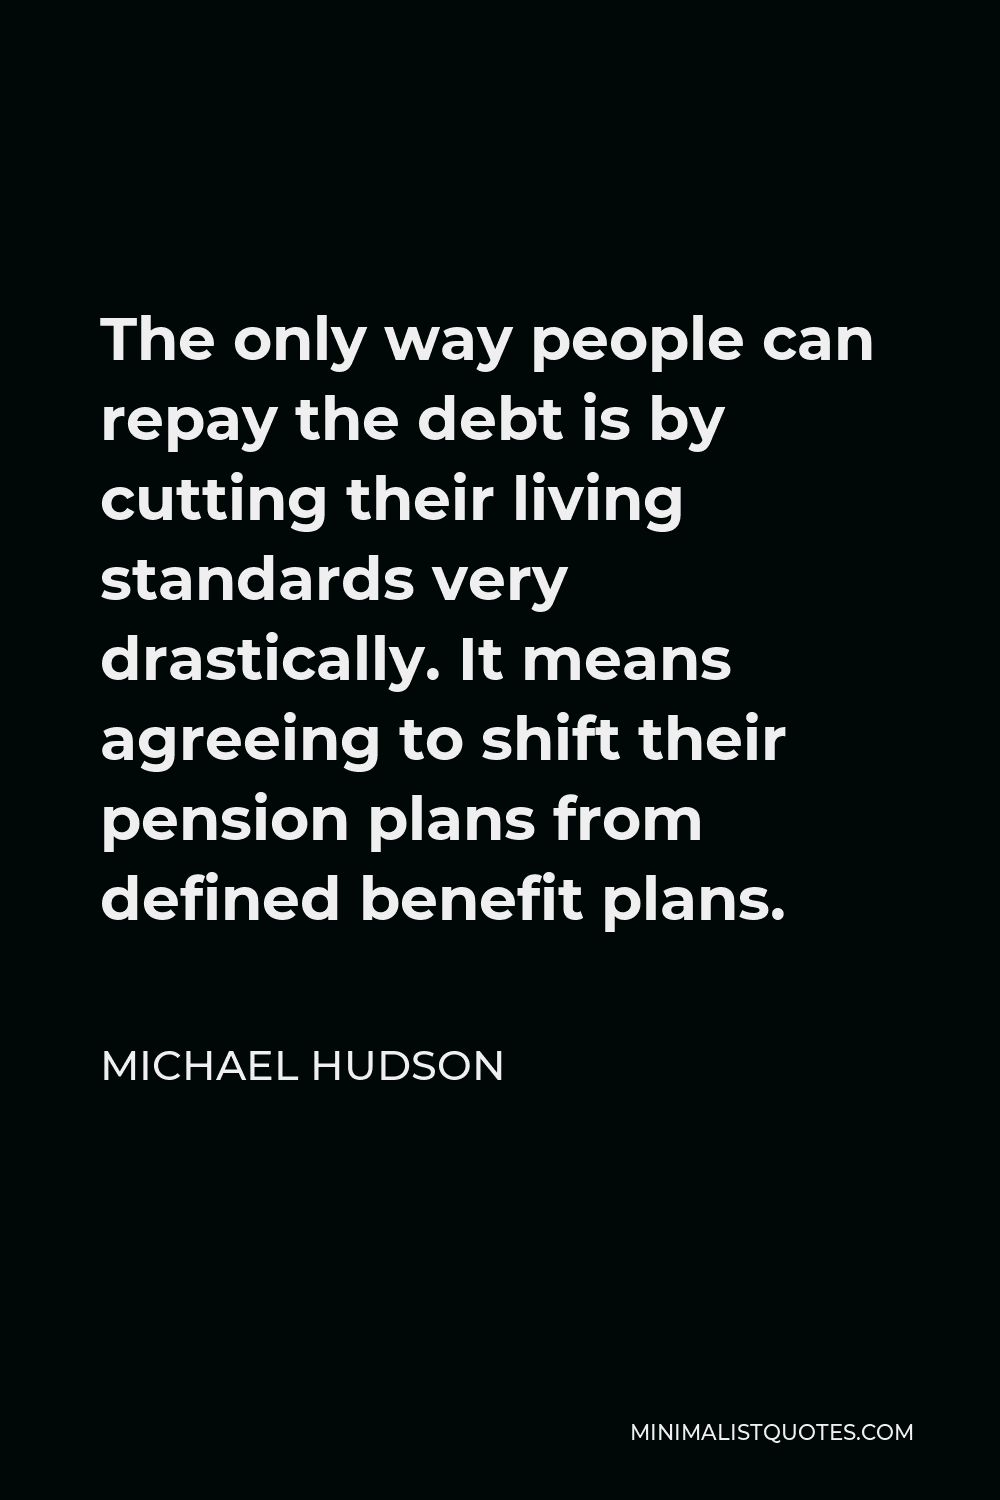 Michael Hudson Quote - The only way people can repay the debt is by cutting their living standards very drastically. It means agreeing to shift their pension plans from defined benefit plans.